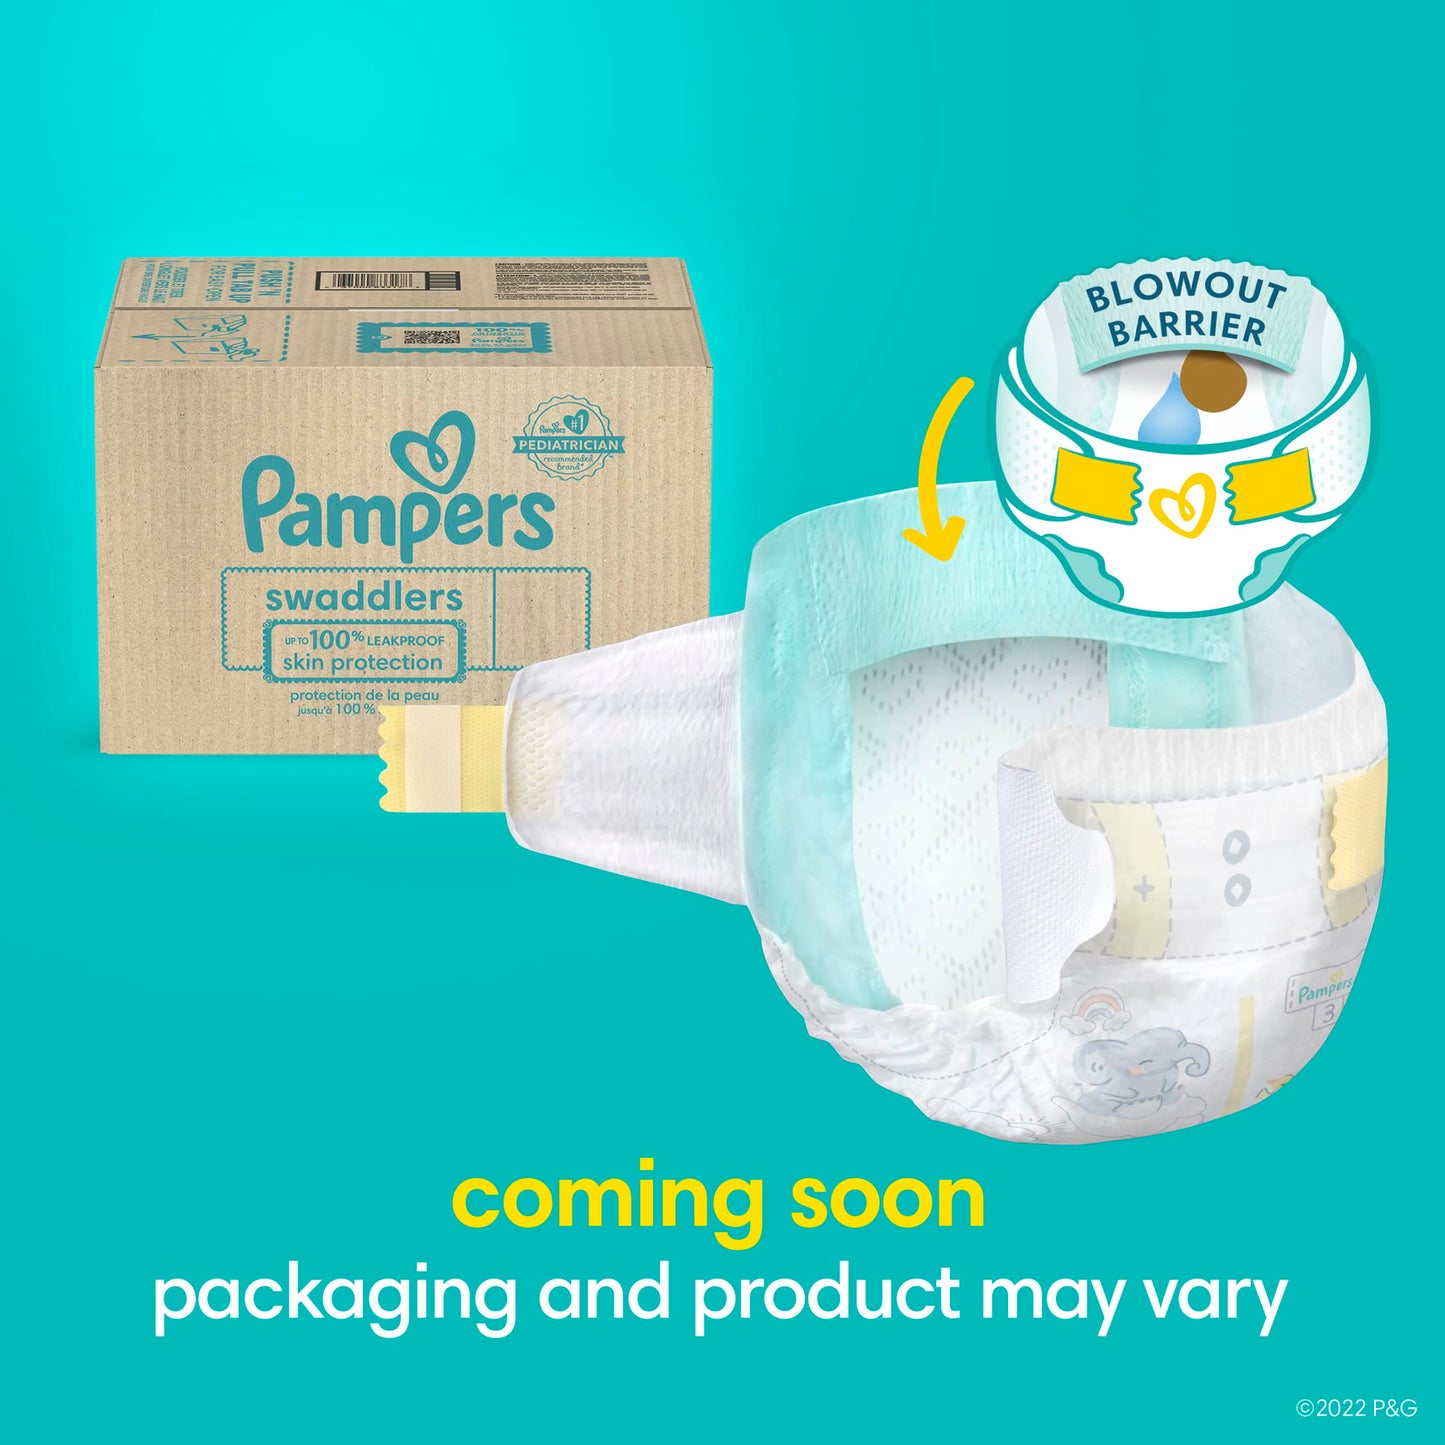 Pampers Swaddlers, Size 2, Count 156